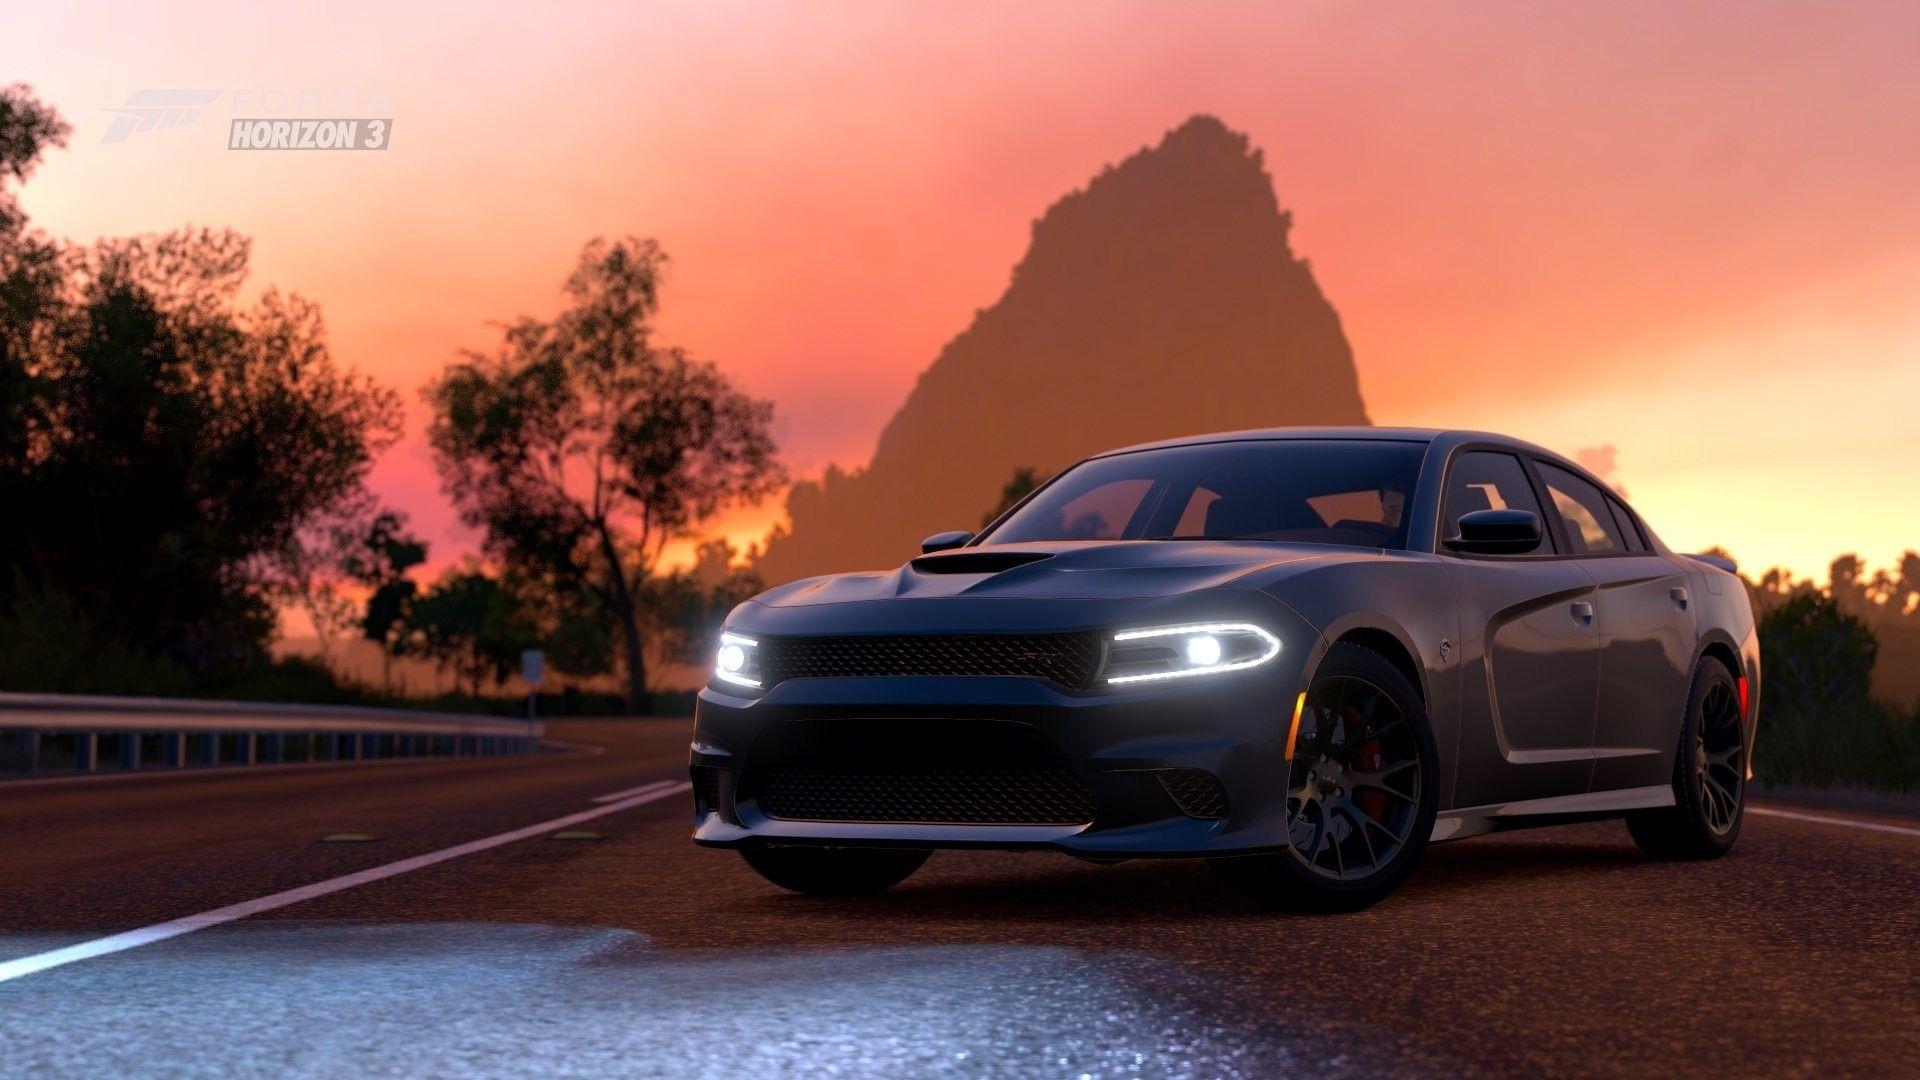 Dodge Charger Wallpaper Free Dodge Charger Background